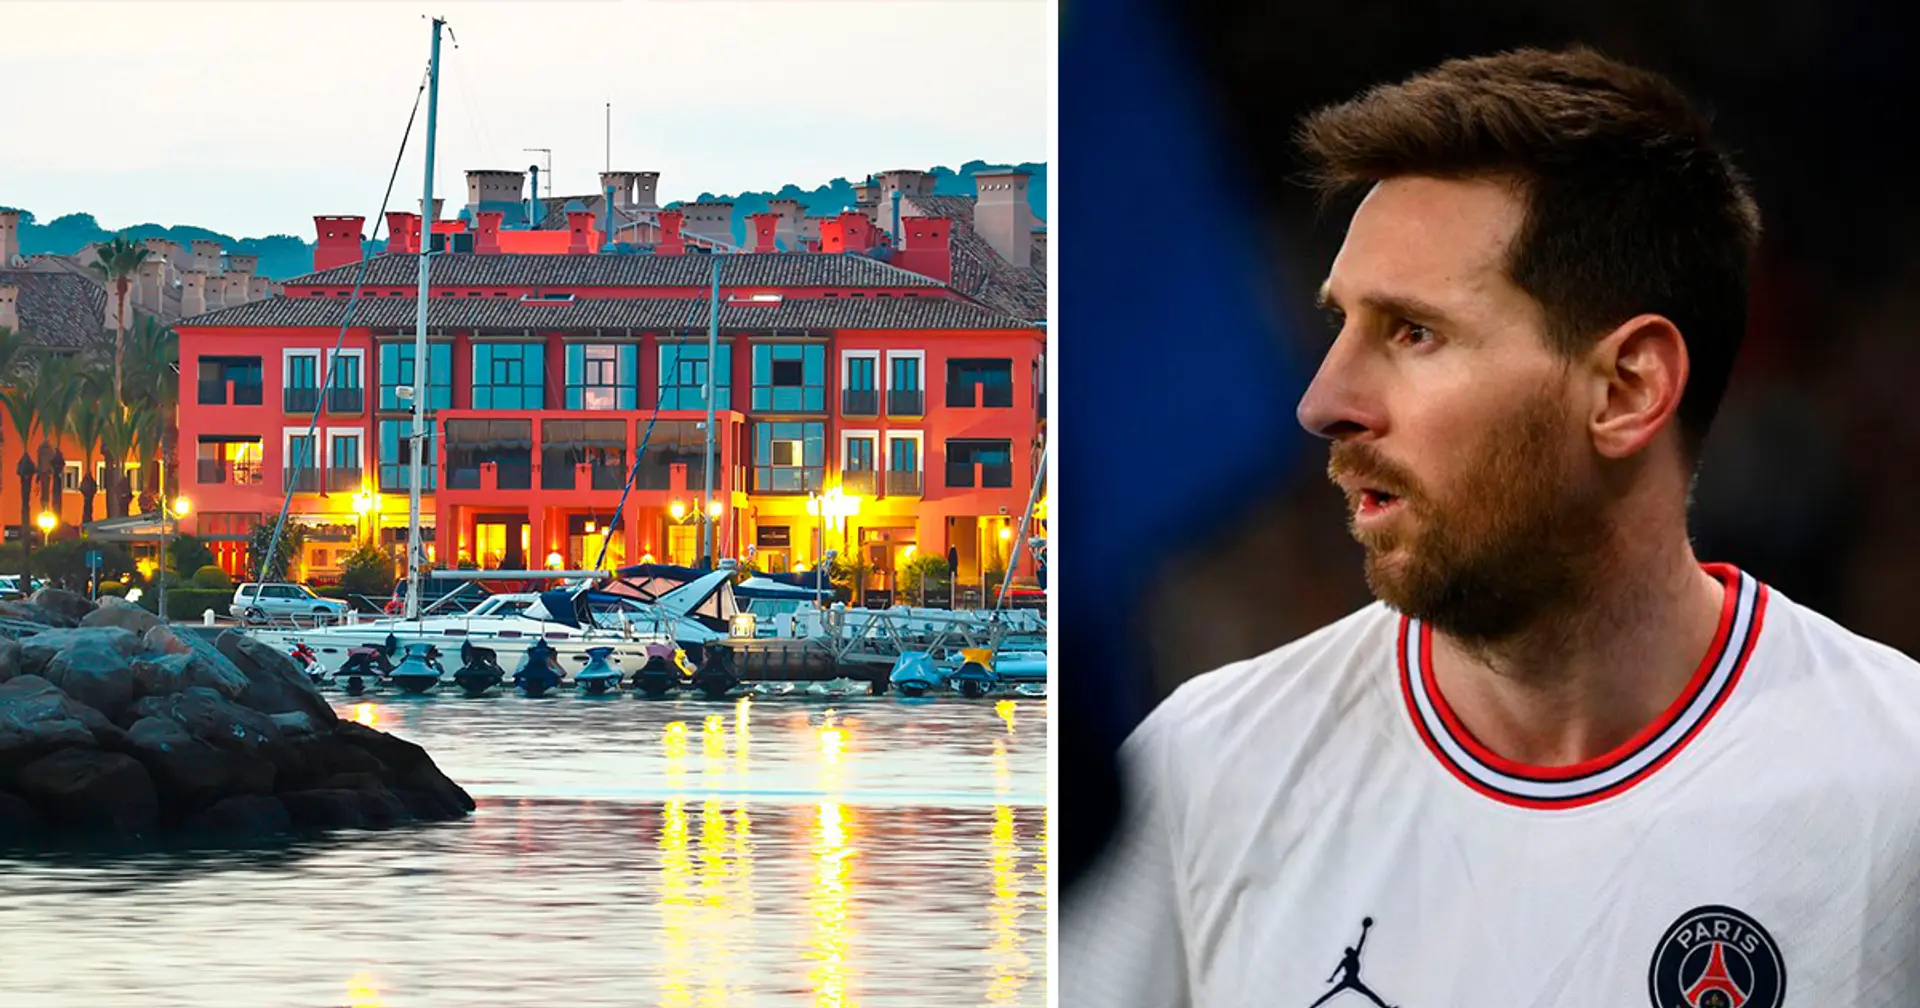 Lionel Messi fires all the staff after buying a luxury hotel in Spain